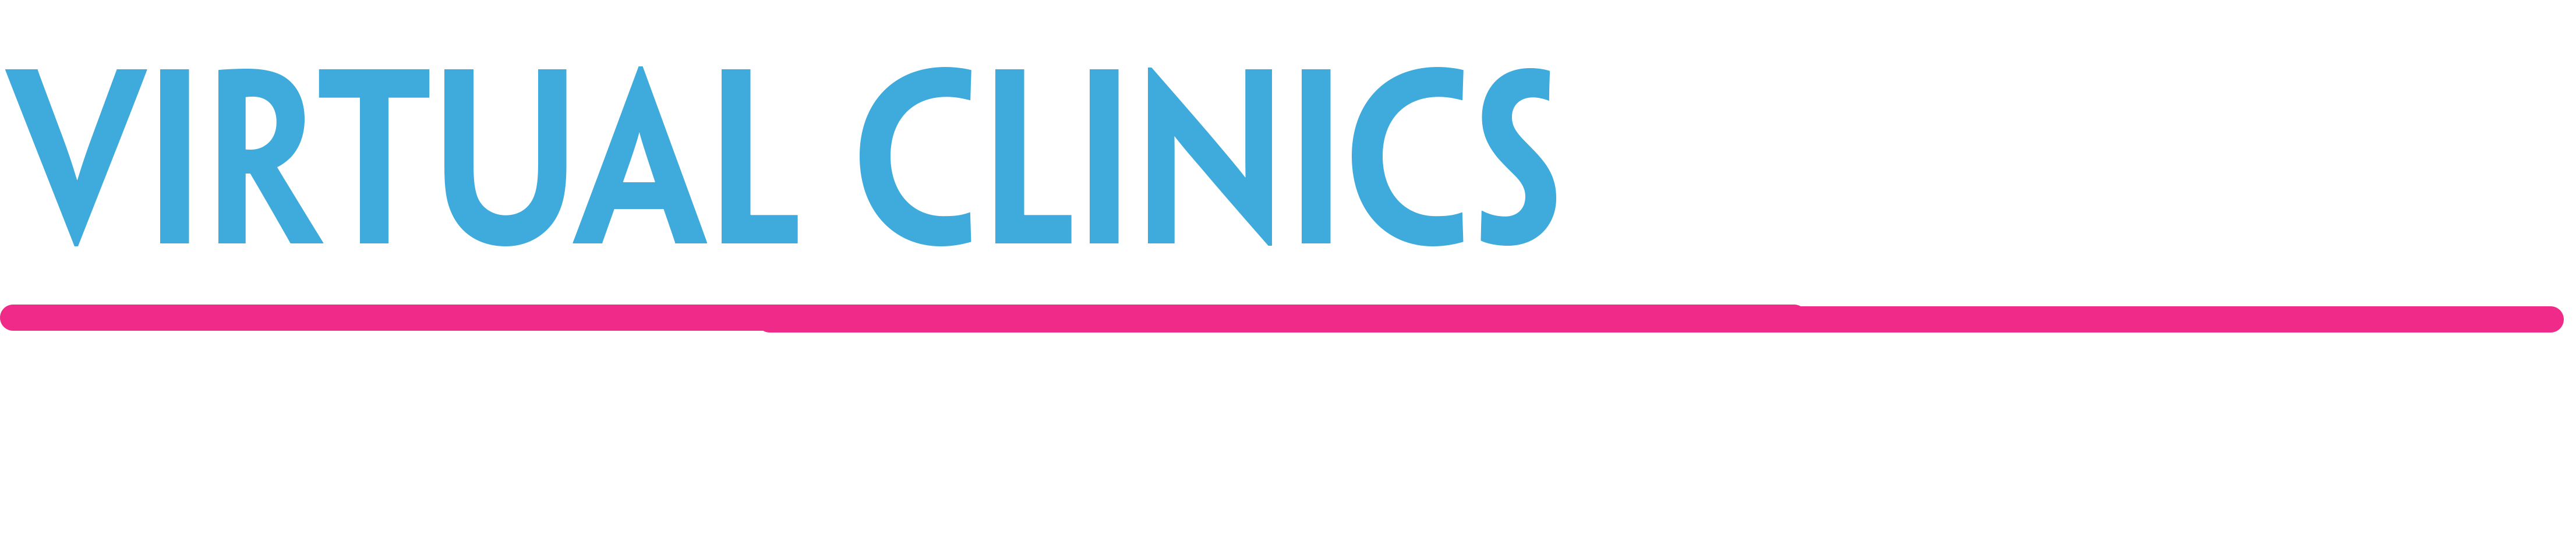 Issues & Answers Virtual Clinics - Interactive patient journeys